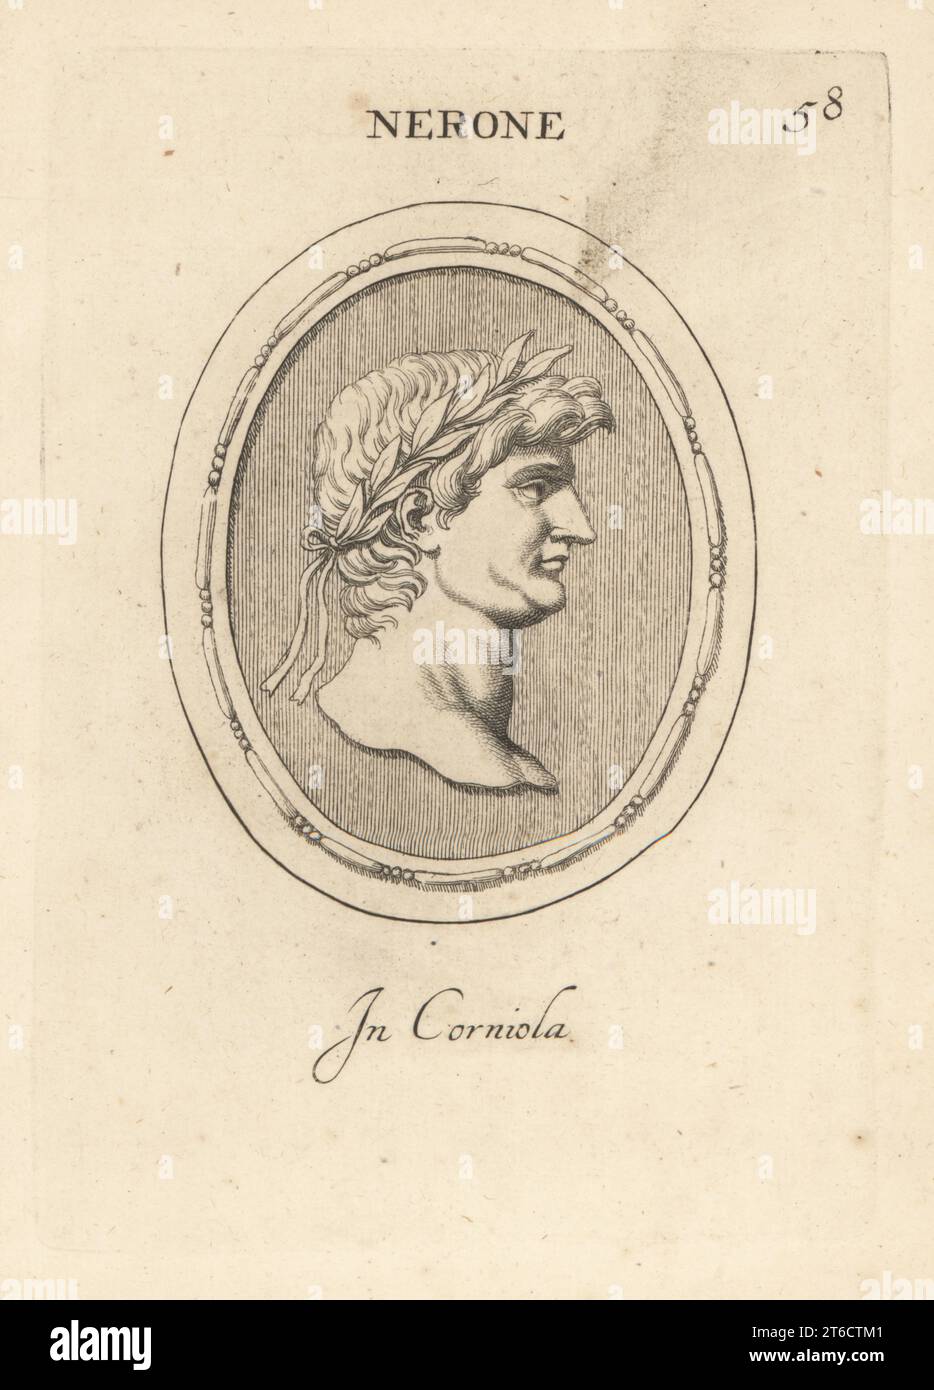 Bust of Nero Claudius Caesar Augustus Germanicus, AD 37 - AD 68. Fifth Roman emperor and final emperor of the Julio-Claudian dynasty, reigning from AD 54 until his death in AD 68. In carnelian. Nerone. In corniola. Copperplate engraving by Giovanni Battista Galestruzzi after Leonardo Agostini from Gemmae et Sculpturae Antiquae Depicti ab Leonardo Augustino Senesi, Abraham Blooteling, Amsterdam, 1685. Stock Photo